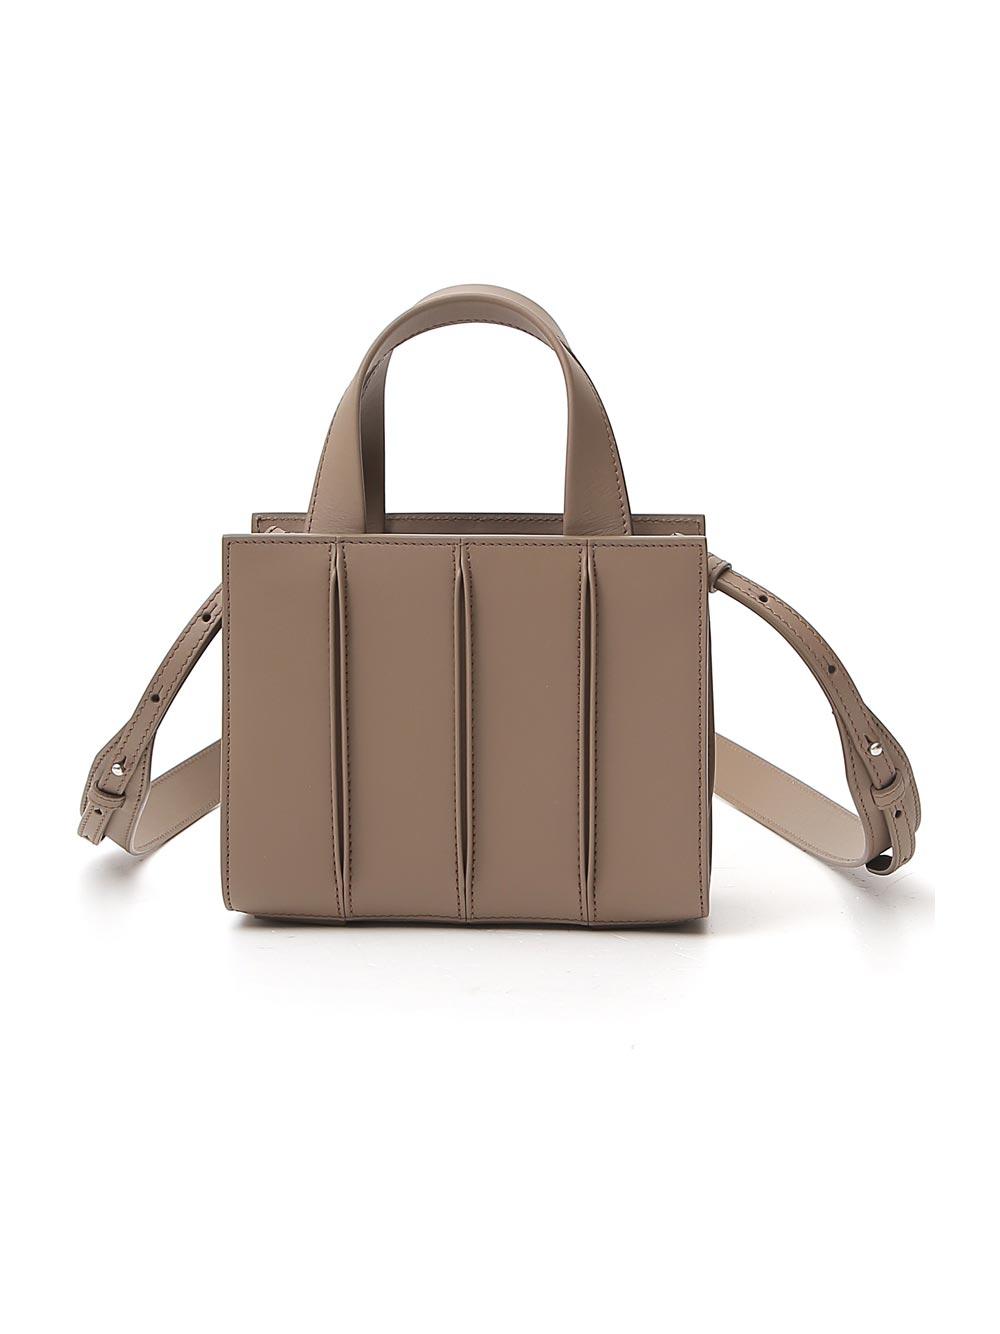 Max Mara Leather Small Whitney Bag in Beige (Natural) | Lyst